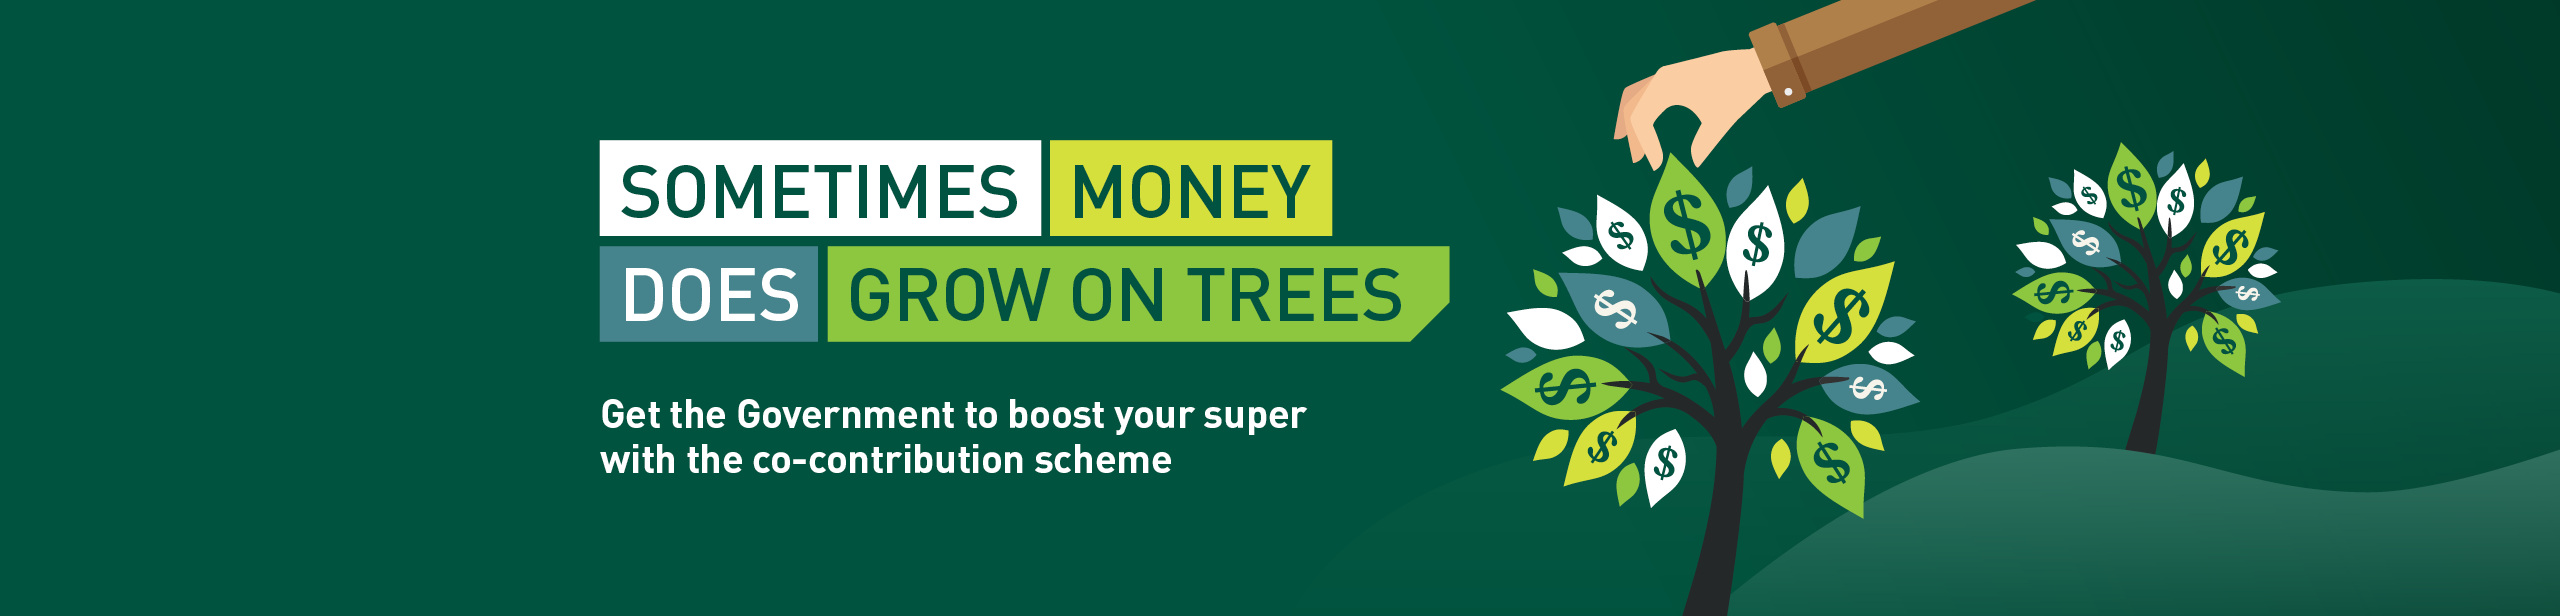 Government co-contribution - Sometimes money does grow on trees. Get the government to boost your super with co-contribution scheme